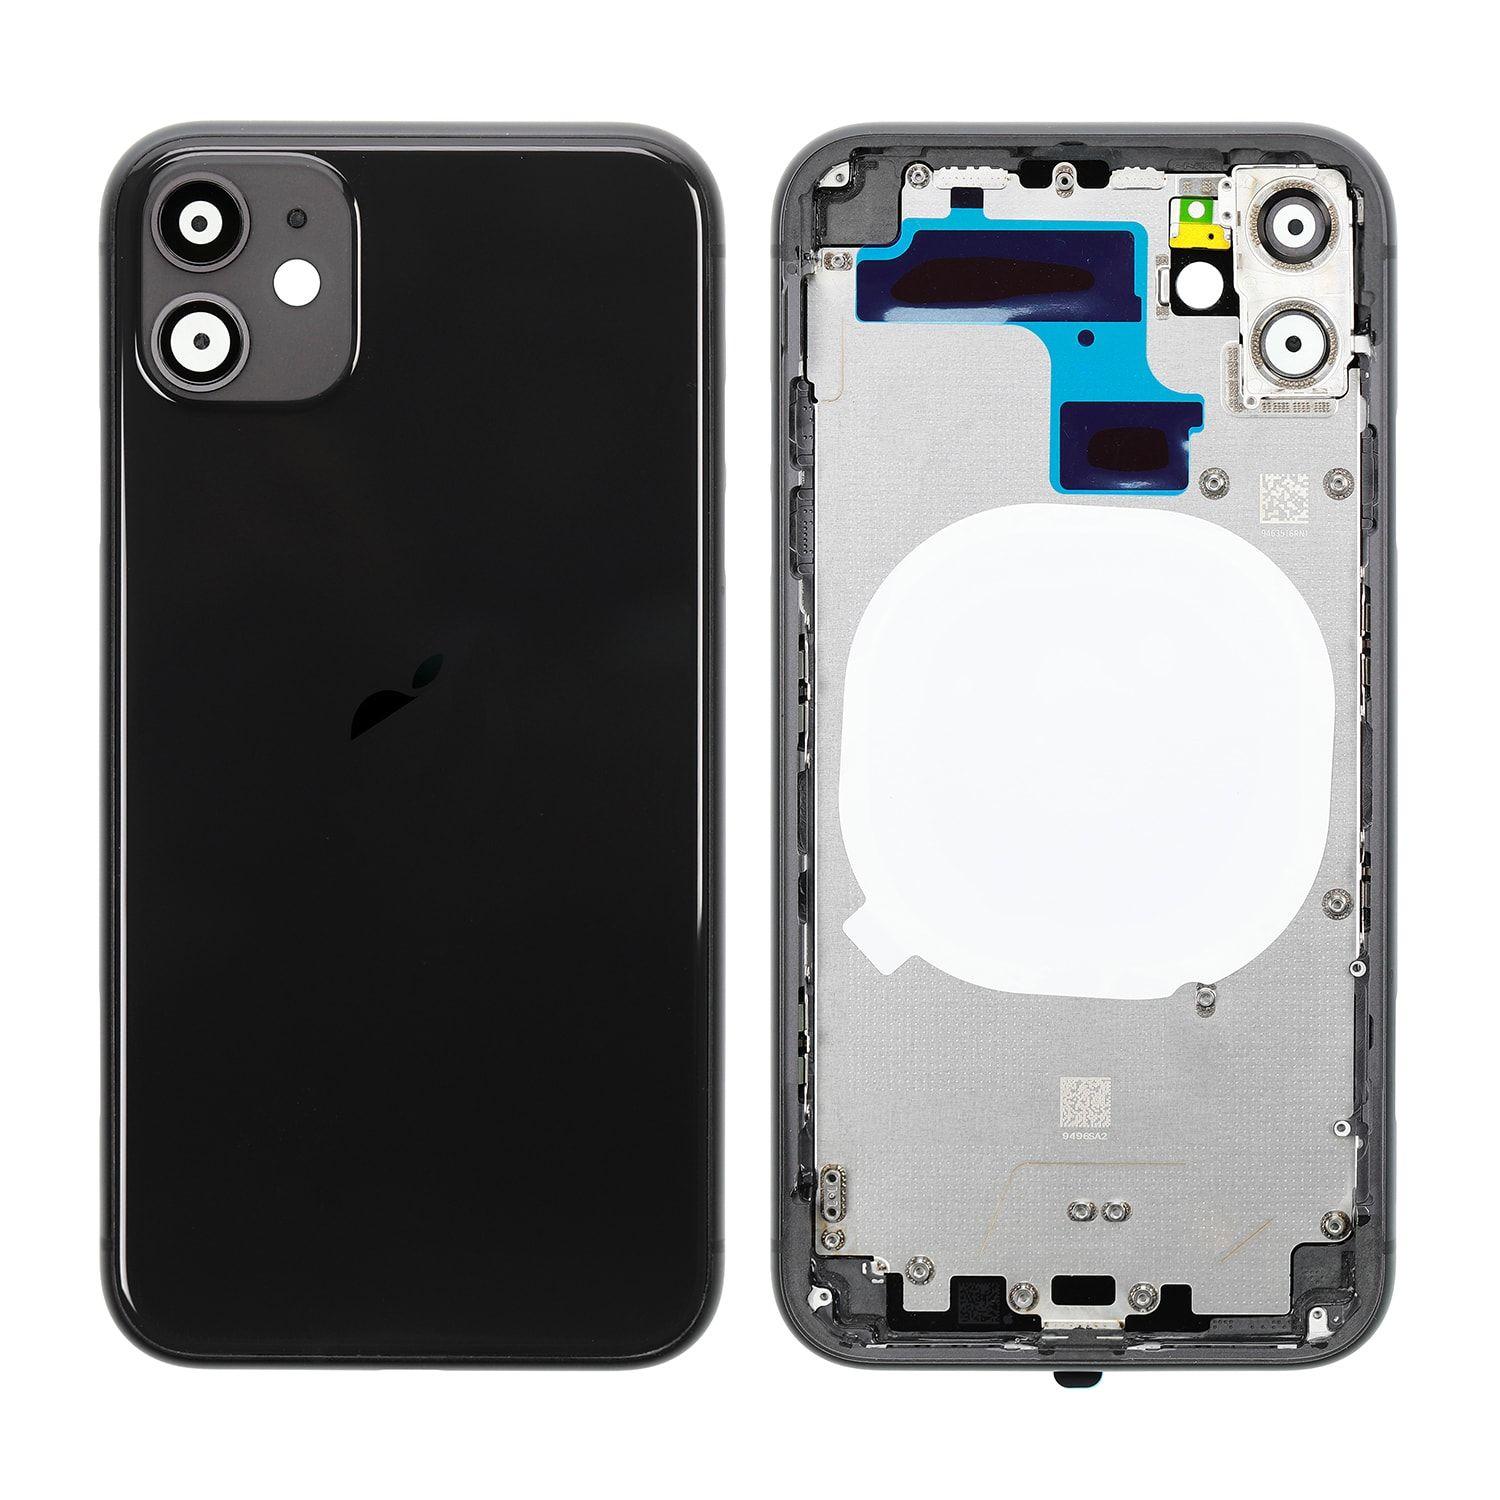 Body for iPhone 11 + back cover black